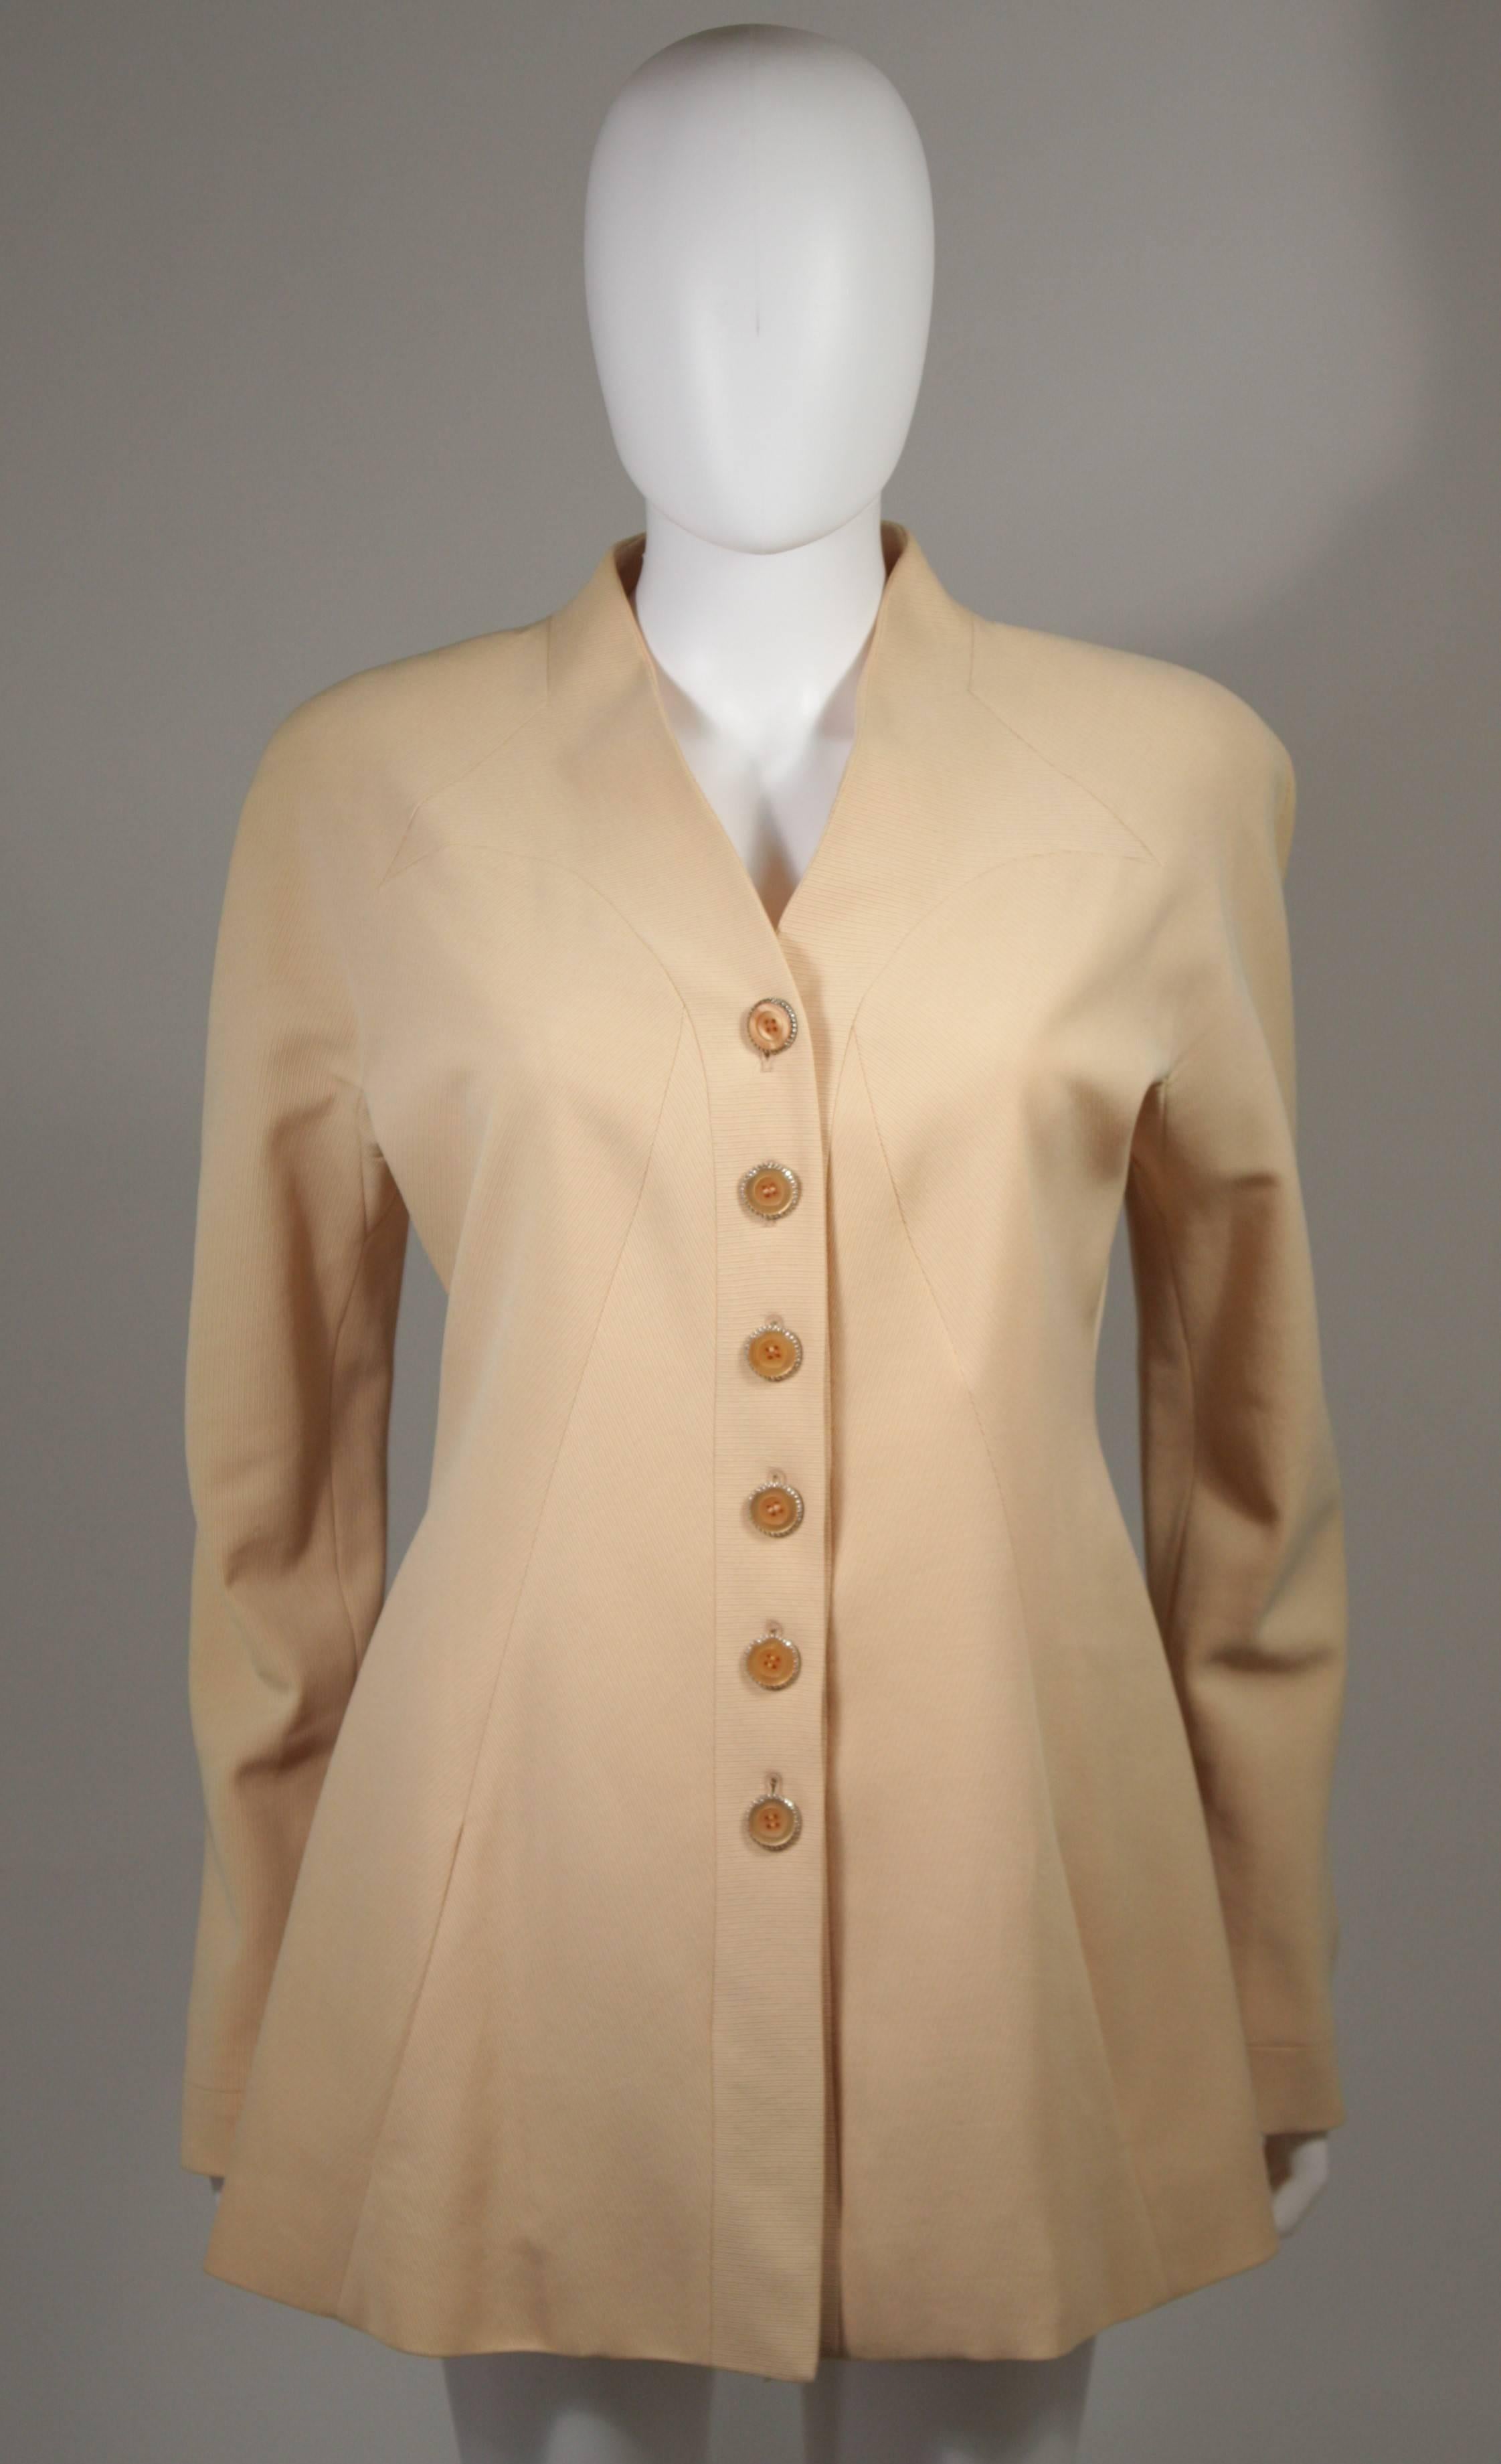 This Karl Lagerfield jacket is composed of an apricot hued fabric. There are center front button closures. In excellent condition. Made in France.

**Please cross-reference measurements for personal accuracy. The size listed in the description box